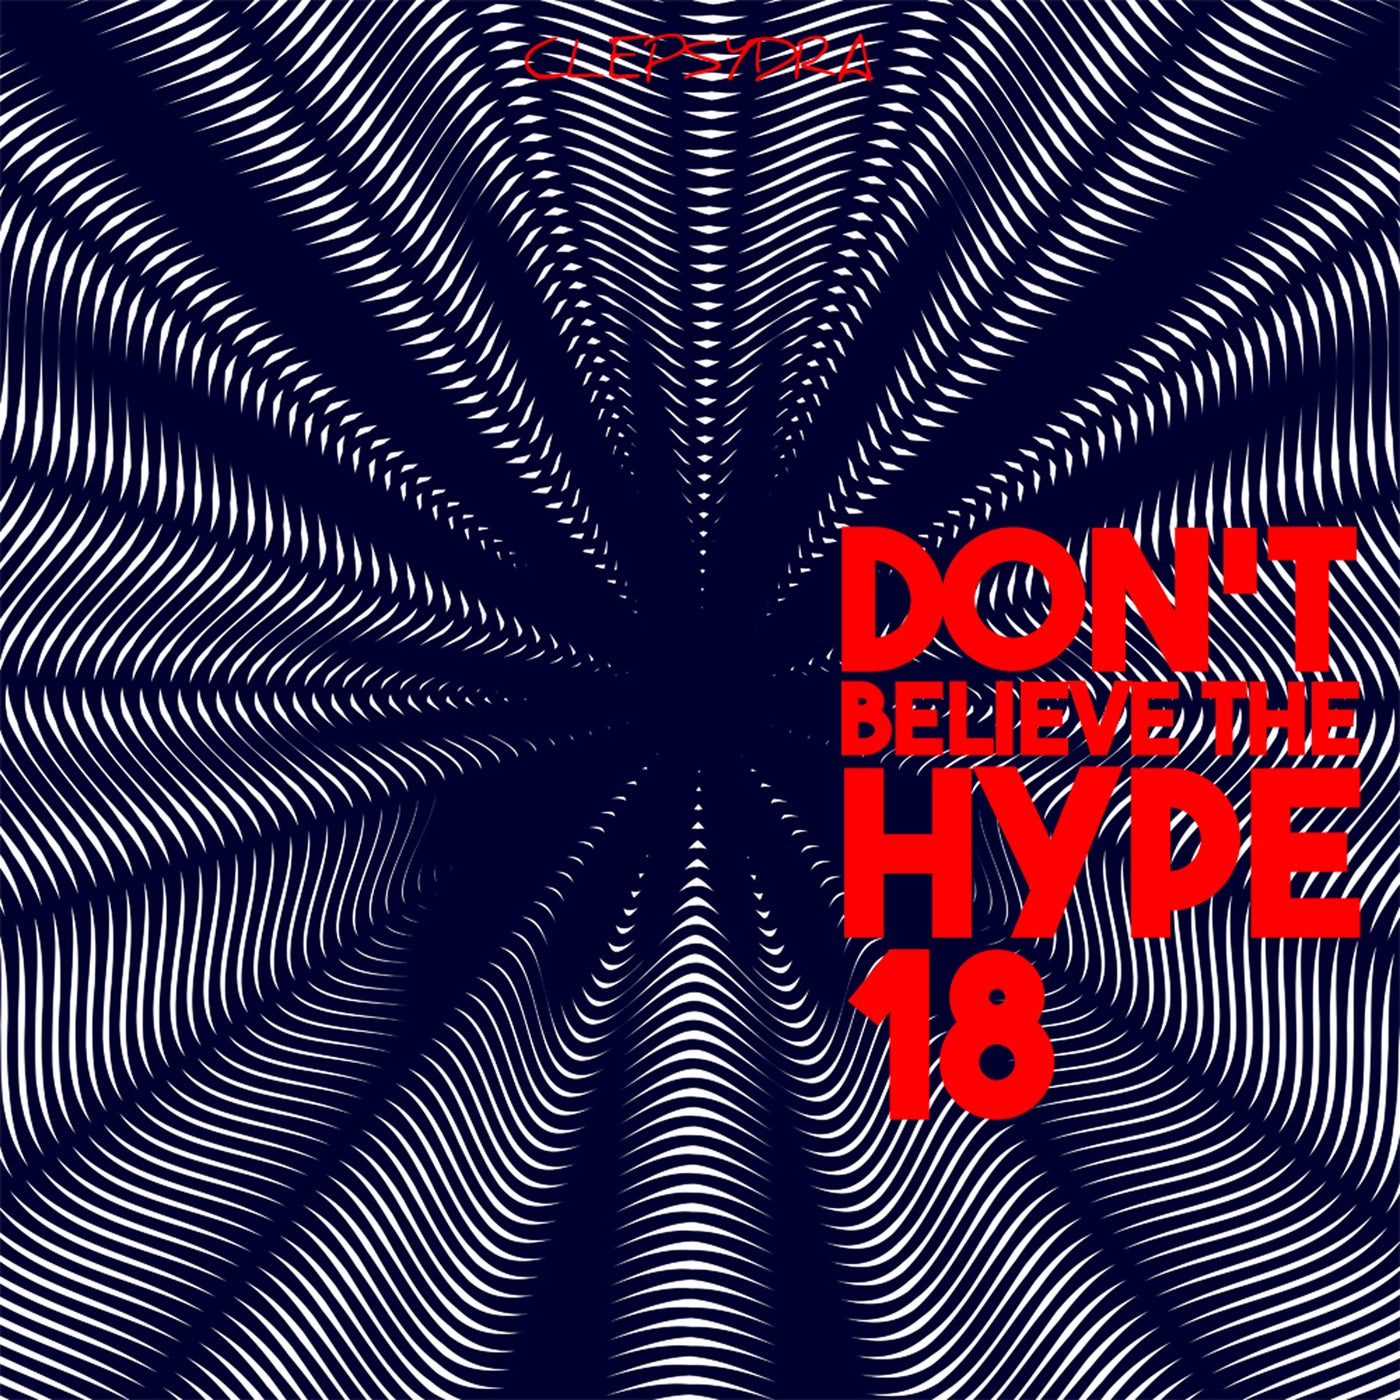 Tiger Stripes, Crackdown – Don’t Believe the Hype 18 [CLEPSYDRA332]